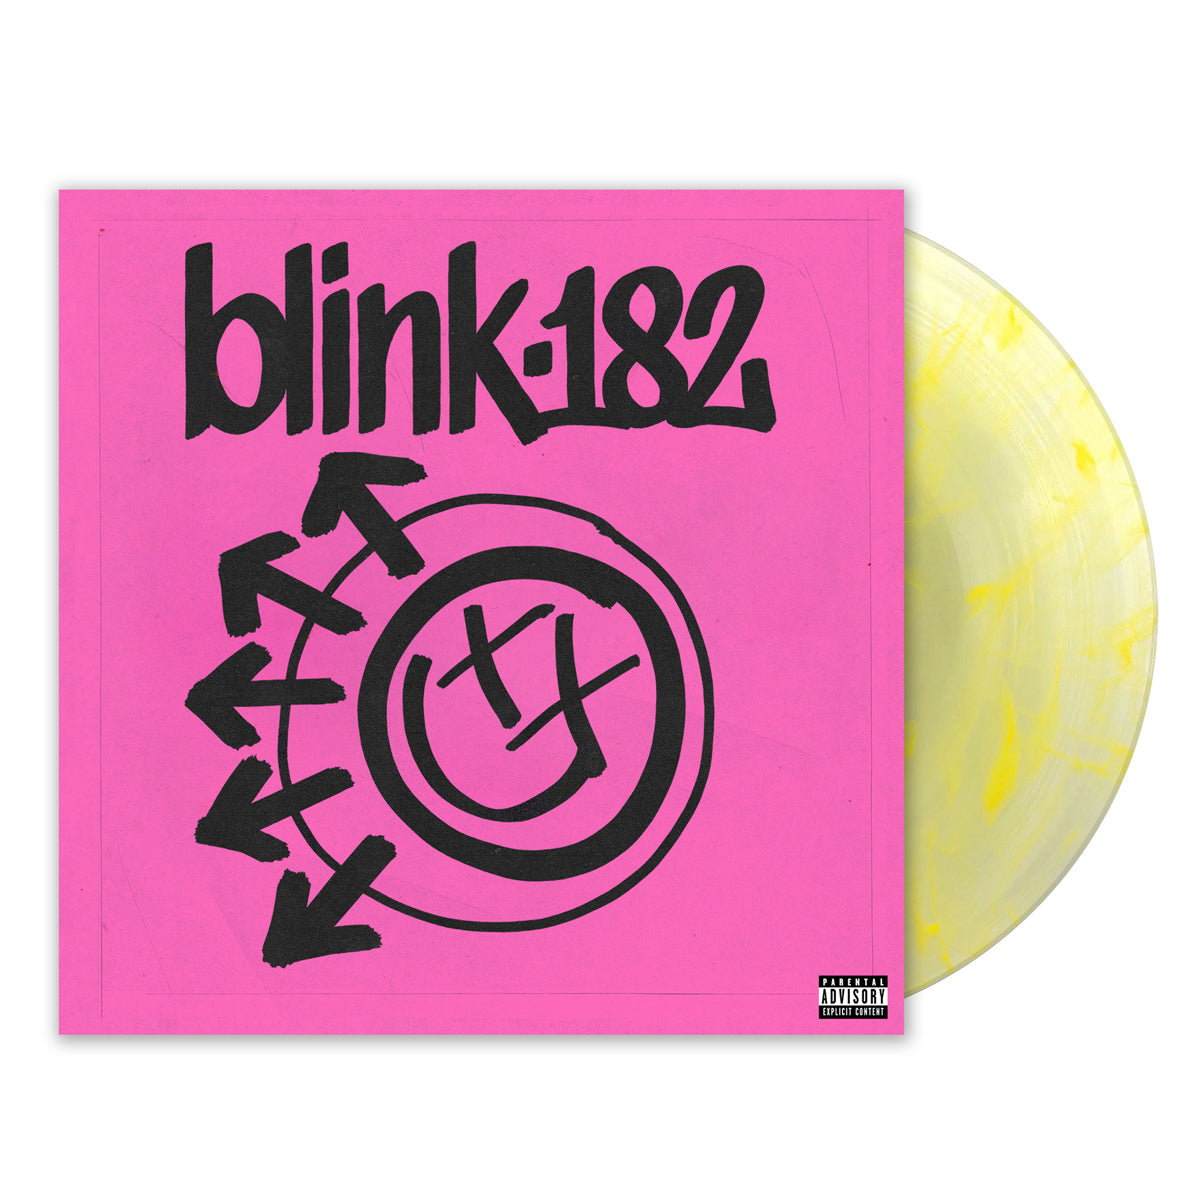  PARAMORE Brand New Eyes LP BLACK-YELLOW SWIRL VINYL /1800  fall out boy.blink 182 - auction details